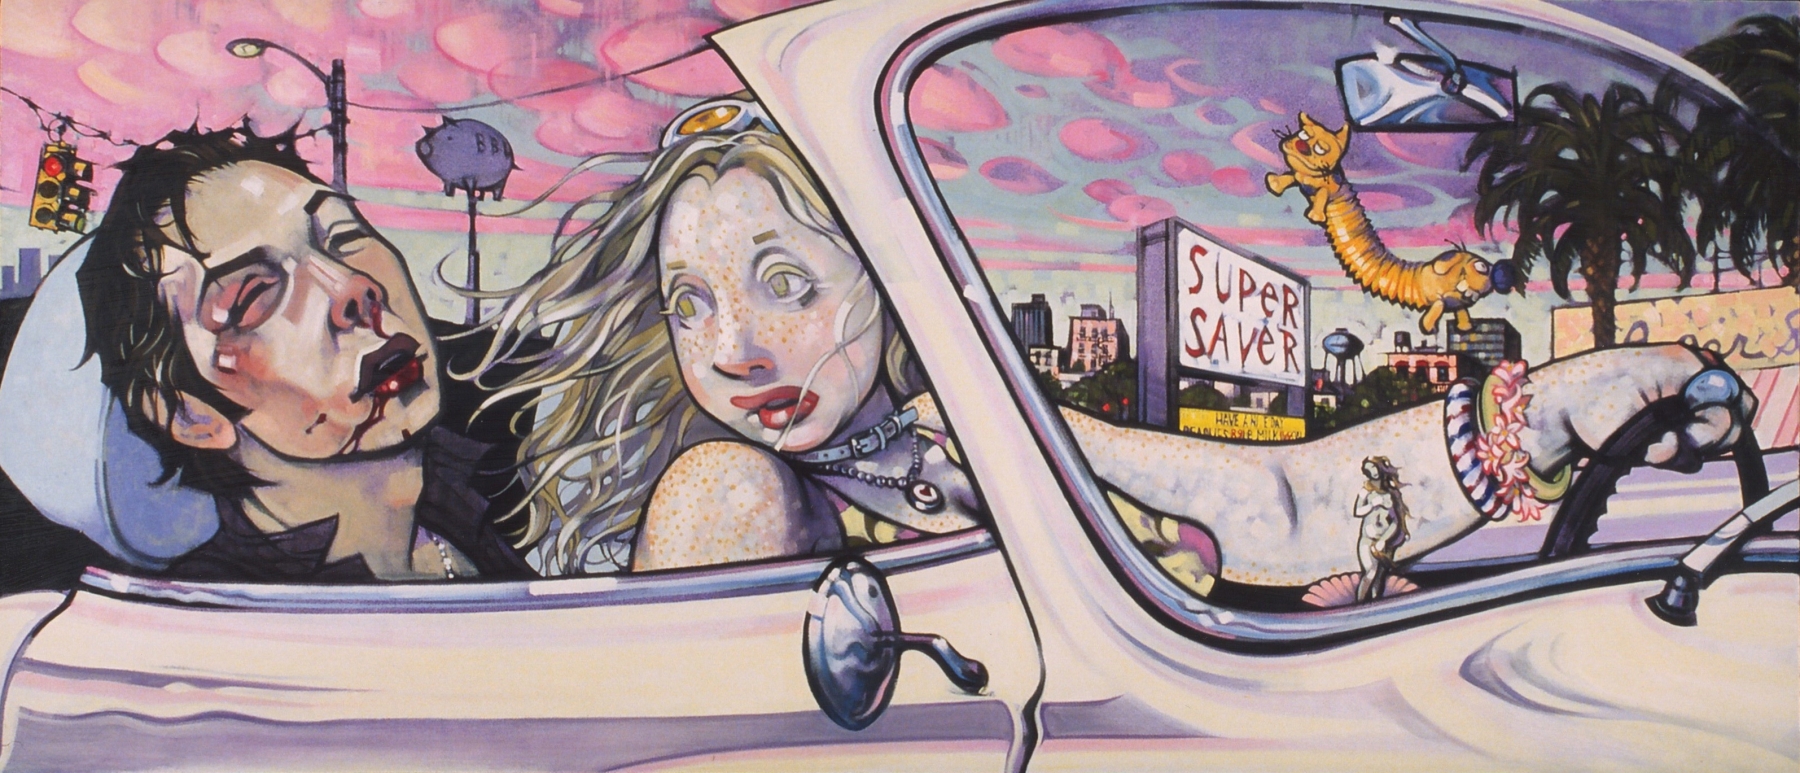 She Drives Me Home, 2002, courtesy of Rob Pulleyn, oil on canvas, 33 x 78 inches, by Taiyo la Paix